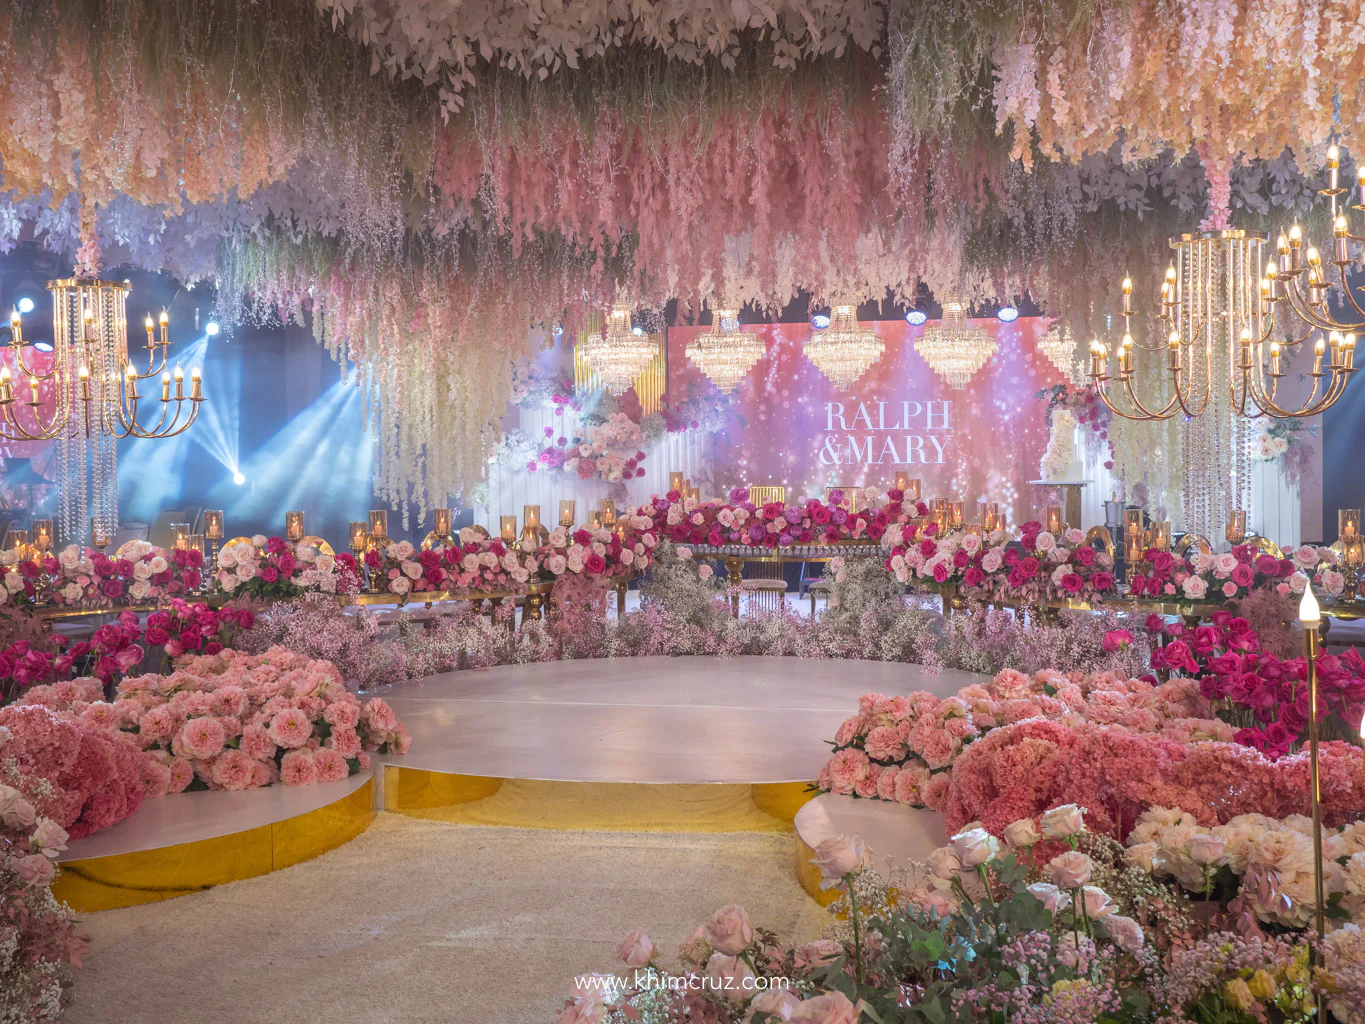 dreamy pink hues floral arrangement enclosing the dance at the wedding reception of Ralph & Mary designed by Khim Cruz